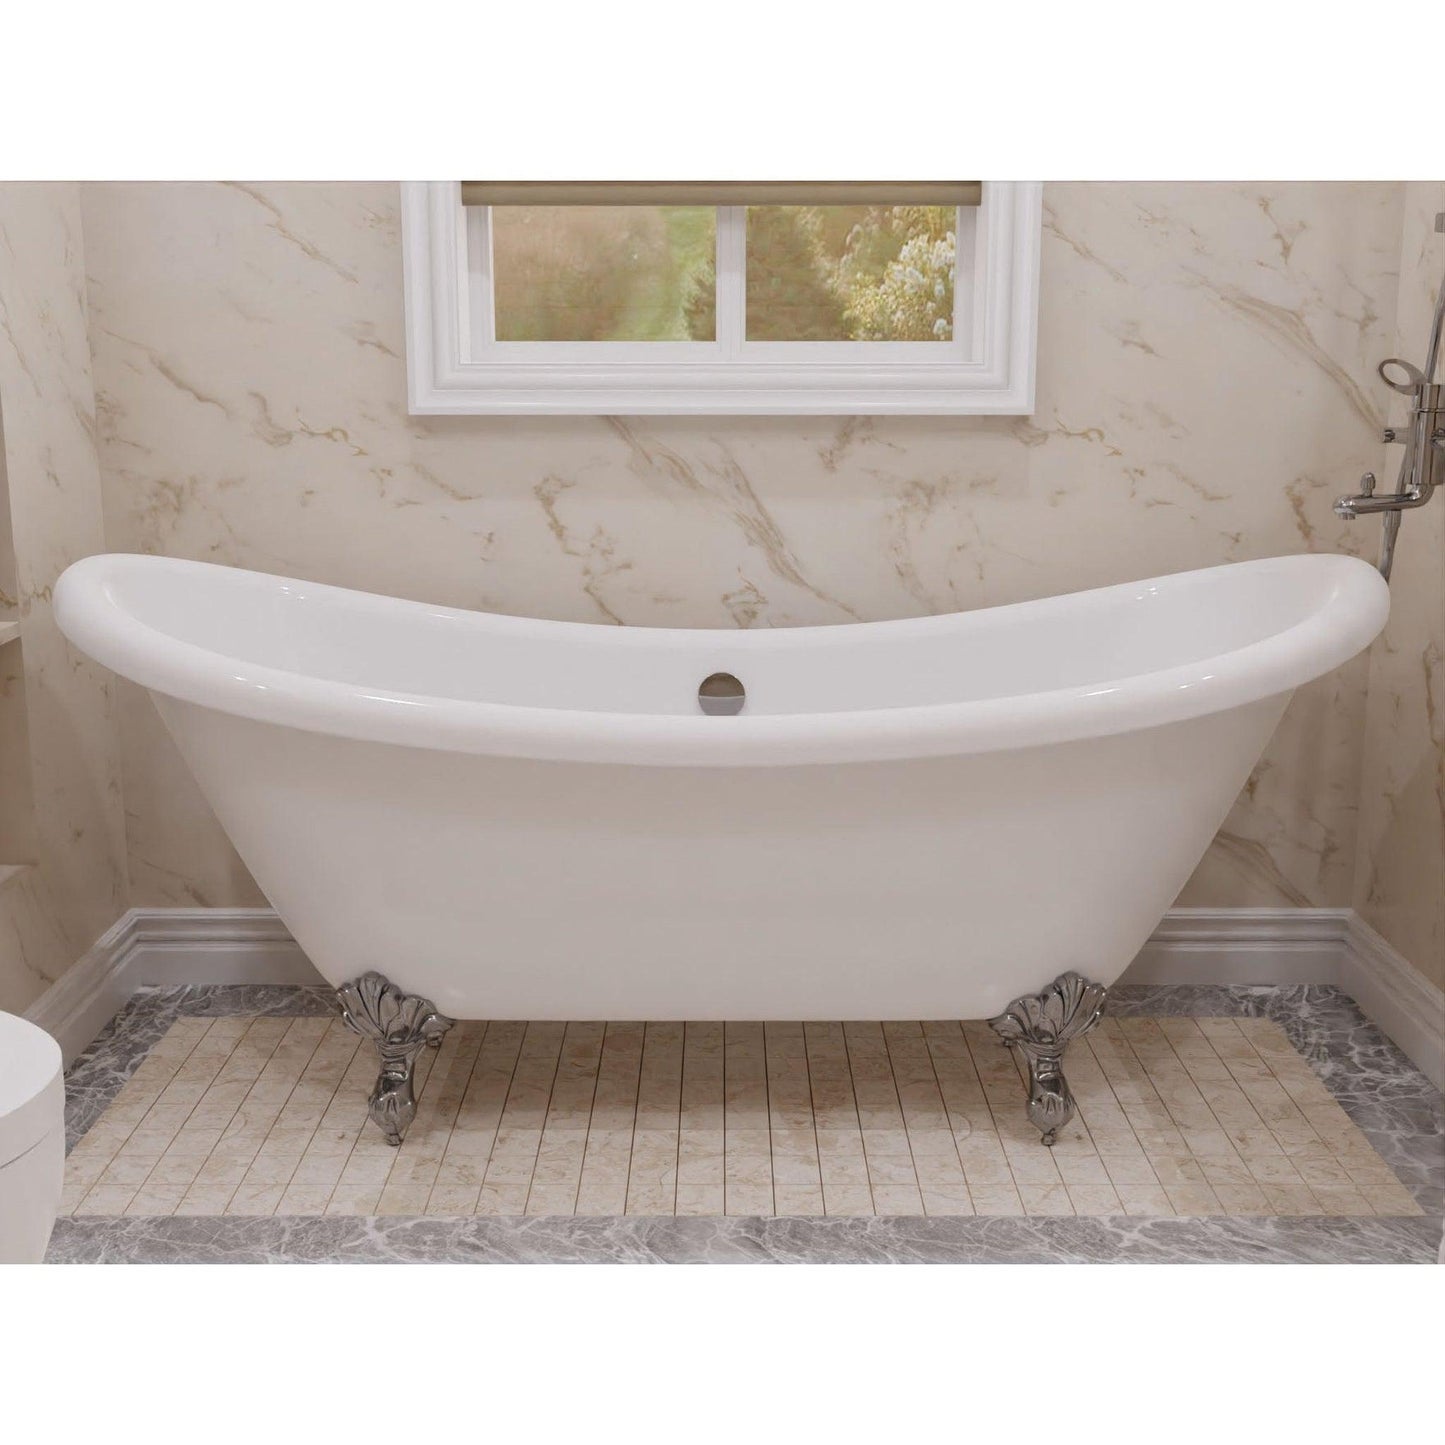 ANZZI Belissima Series 69" x 28" Freestanding Glossy White in Eagle's Talon Claw Feet Style Bathtub With Built-In Overflow